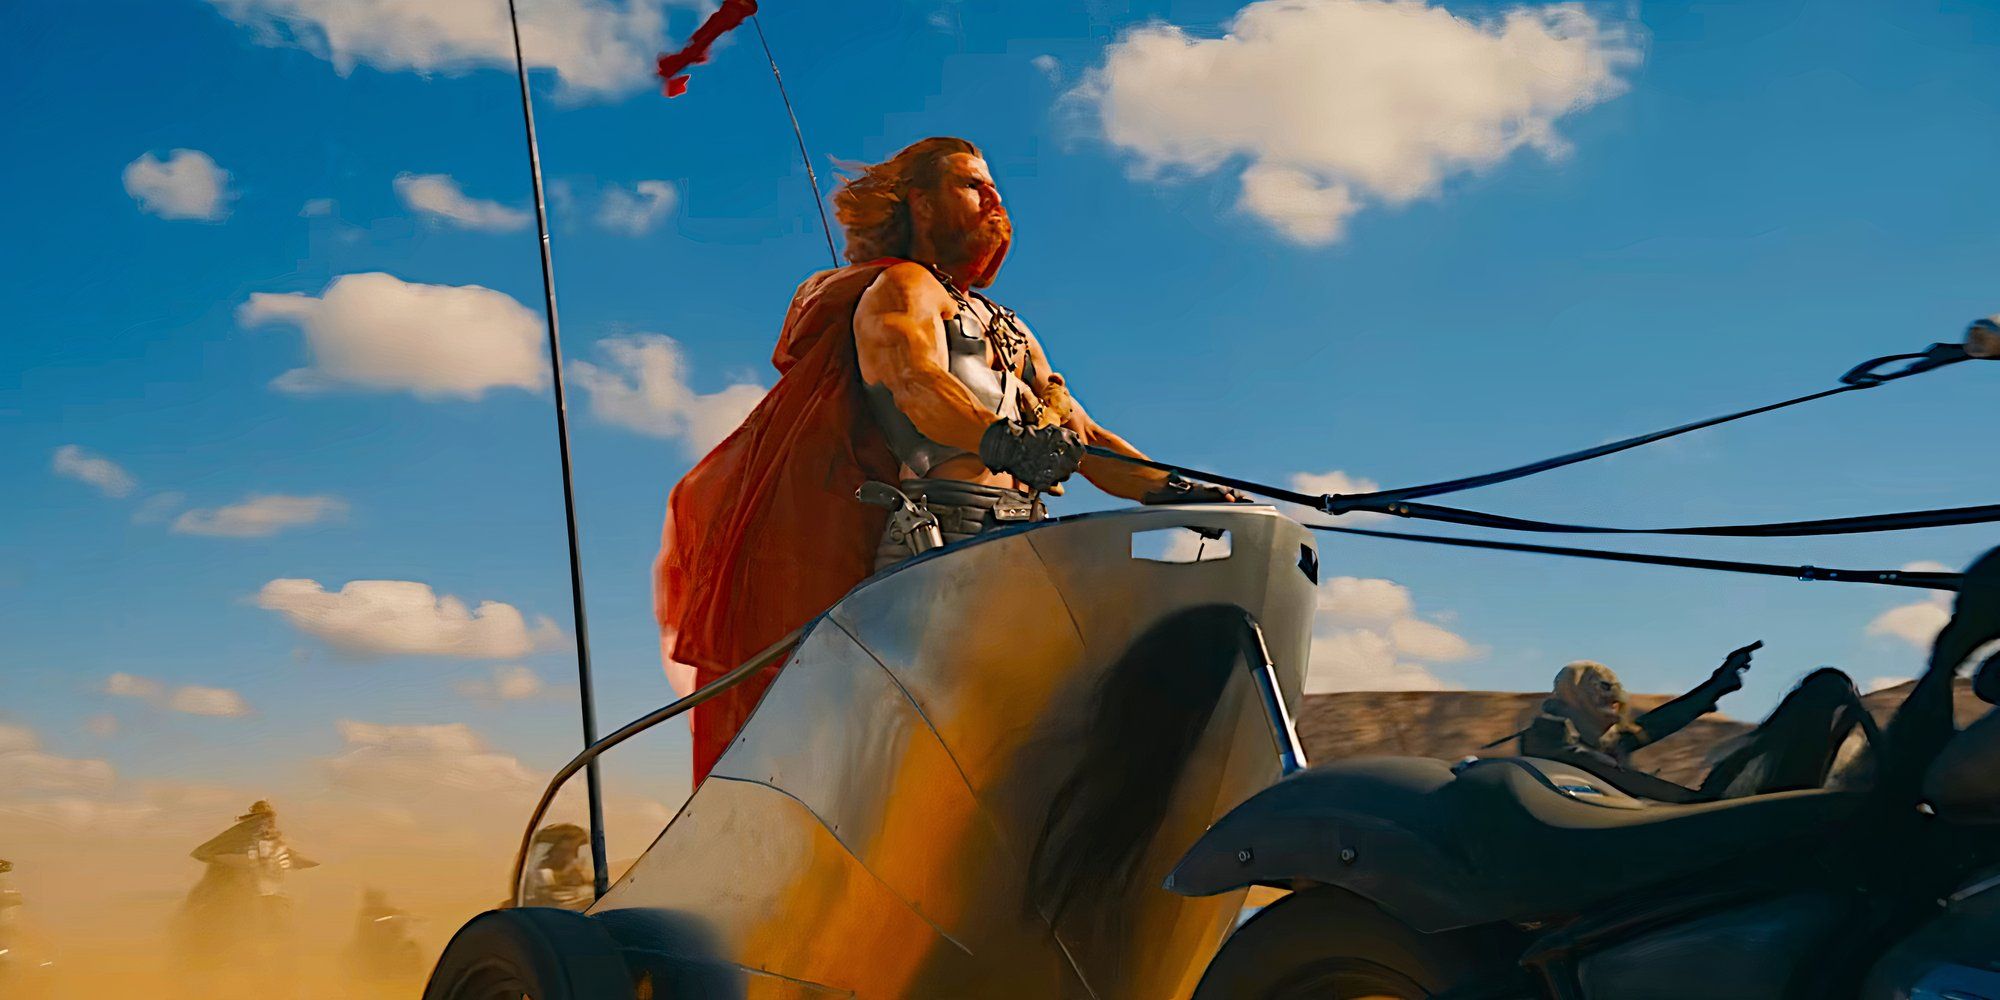 Chris Hemsworth as Dementus riding a metal chariot pulled by two motorcycles in an action scene from Furiosa: A Mad Max Saga